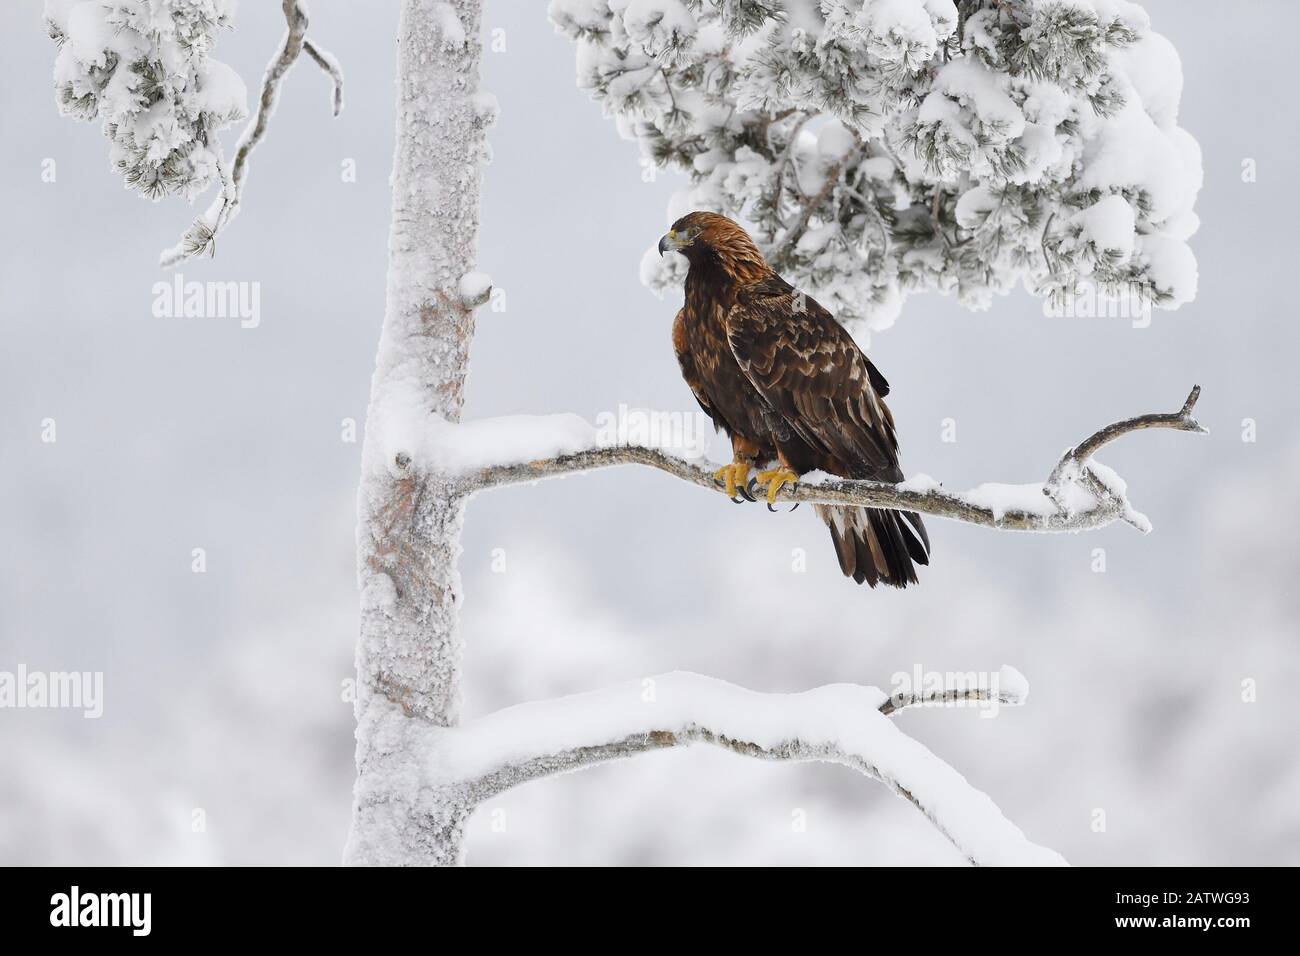 Golden eagle (Aquila chrysaetos) perched in snow covered tree. Kalvtrask, Vasterbotten, Lapland, Sweden. January. Stock Photo